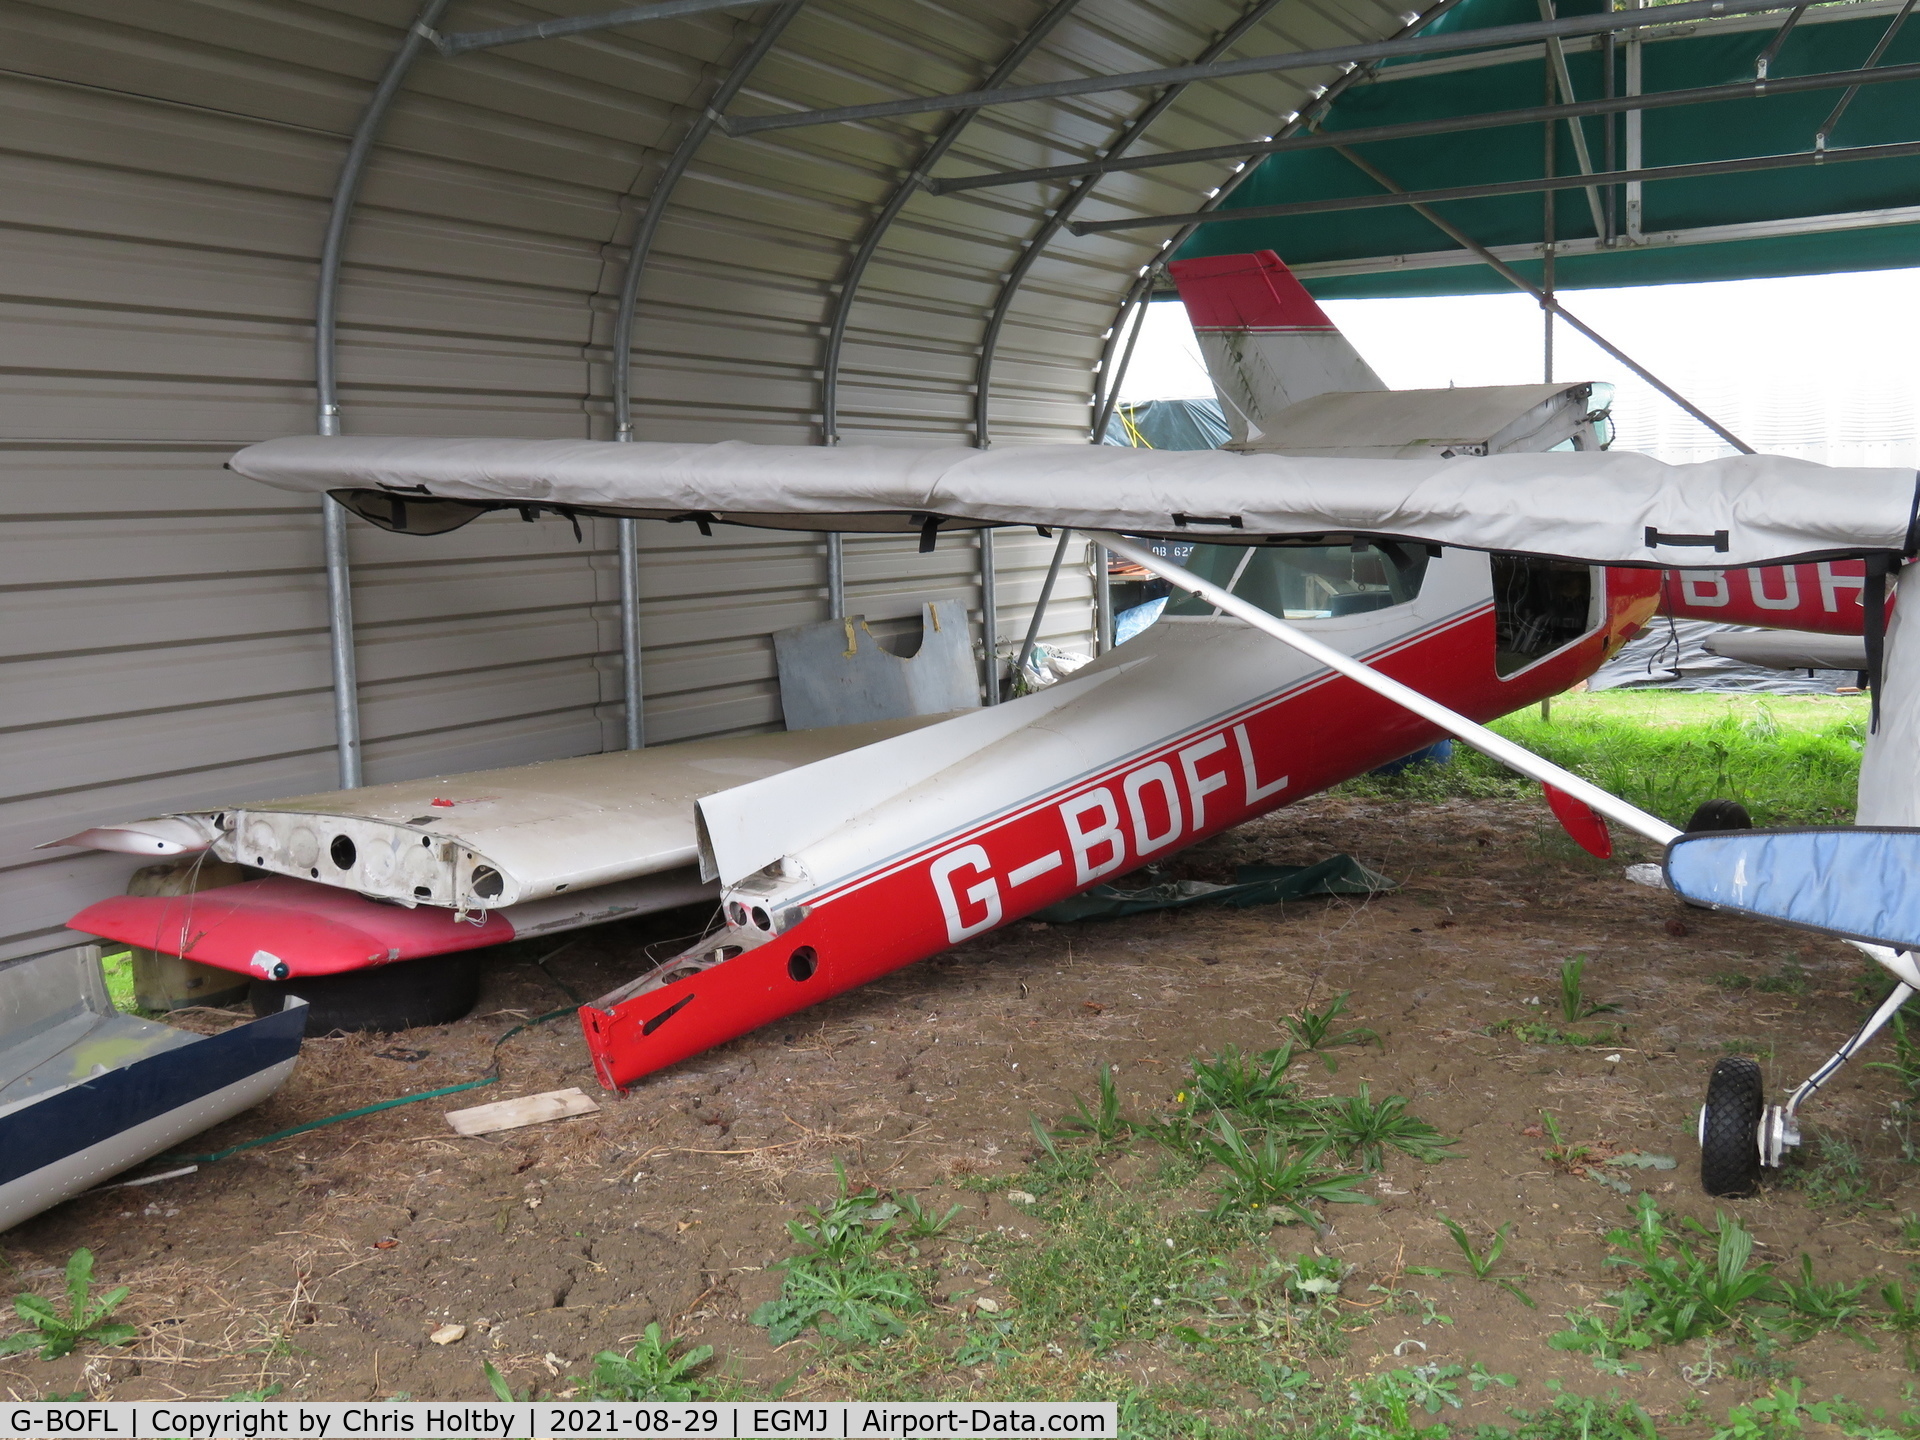 G-BOFL, 1980 Cessna 152 C/N 152-84101, In pieces and stored with its sister G-BOFM at Little Gransden. Remains CAA registered since 2013.